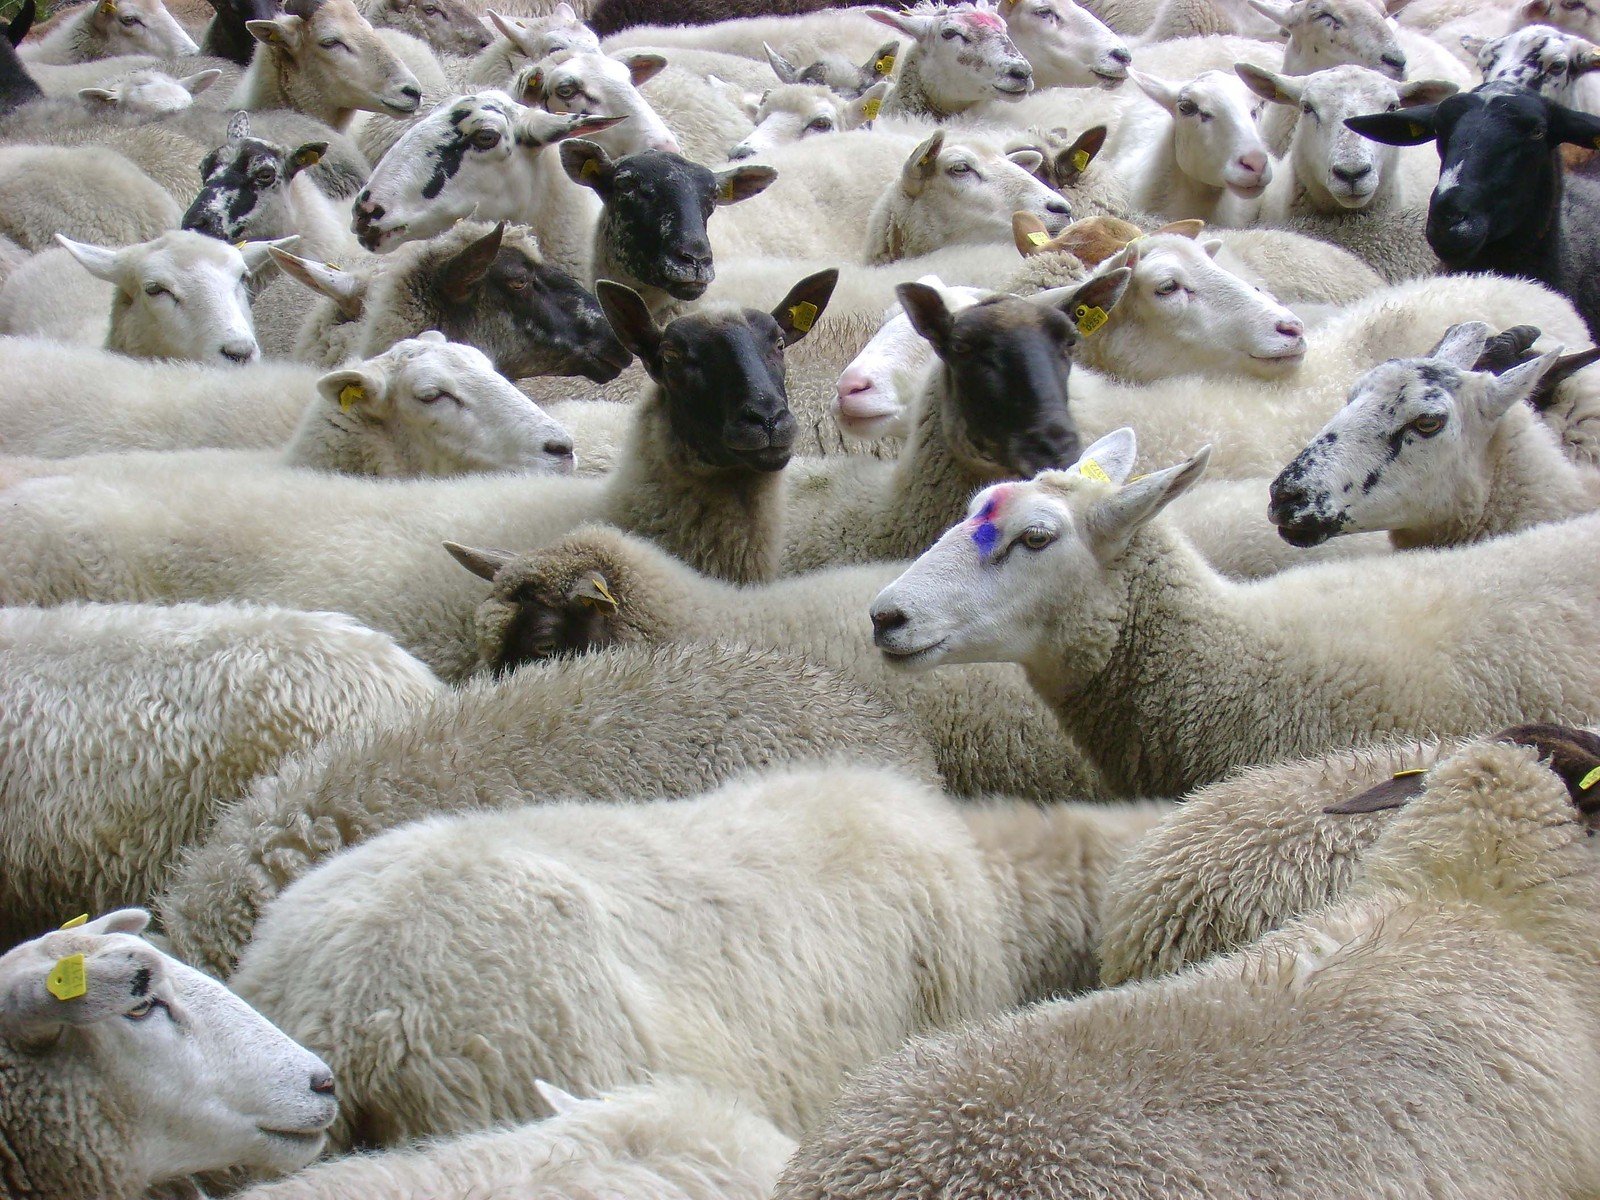 a herd of sheep in a fenced area with colored ribbons